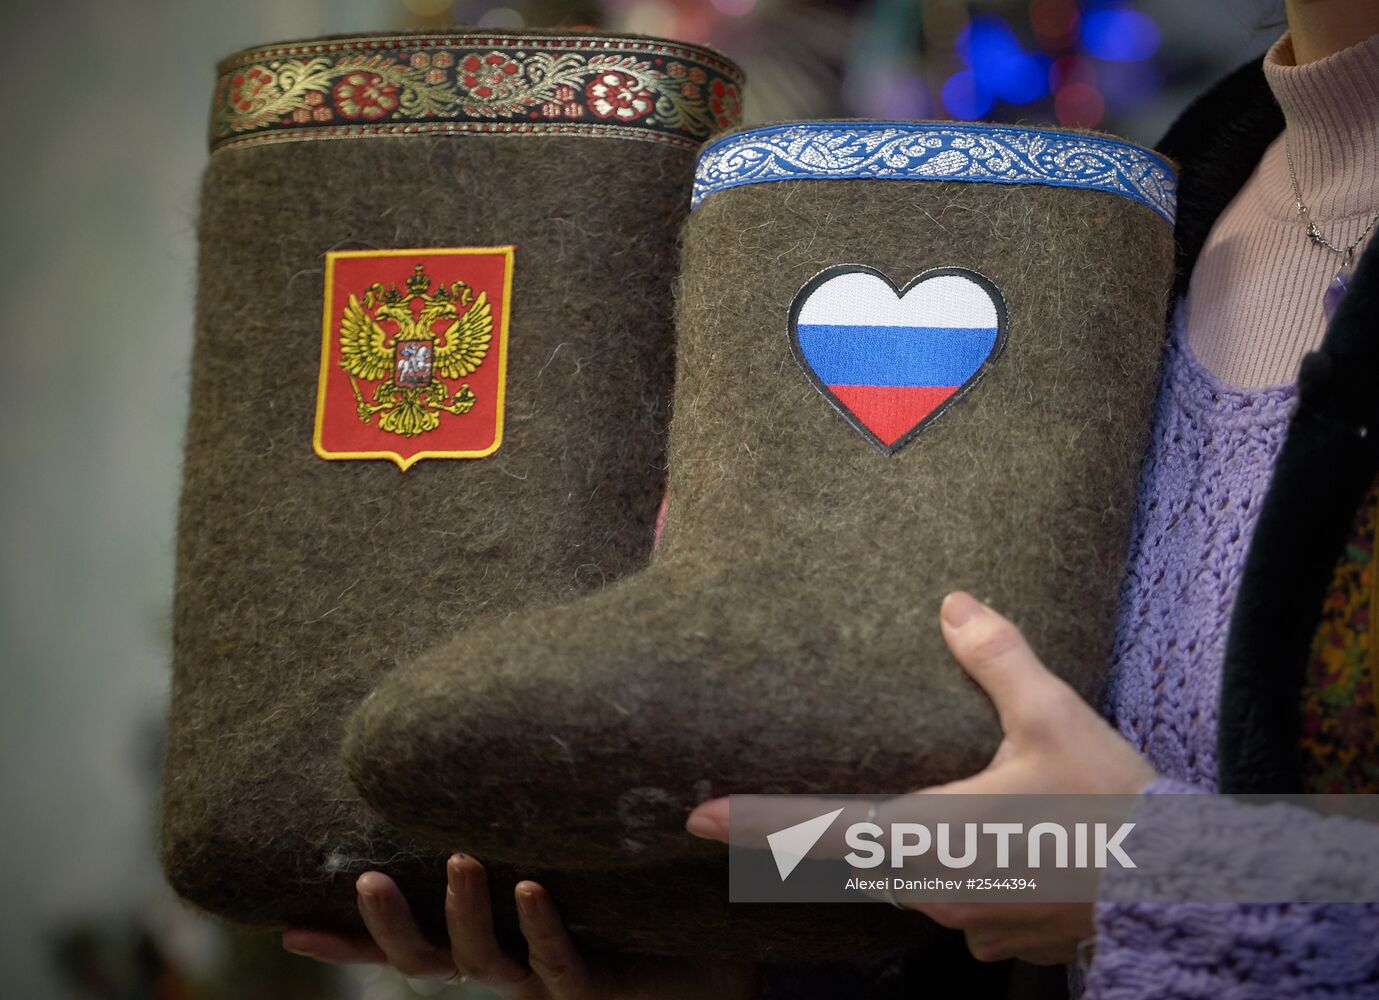 Presentation of new collection of valenki with Russian patriotic symbols